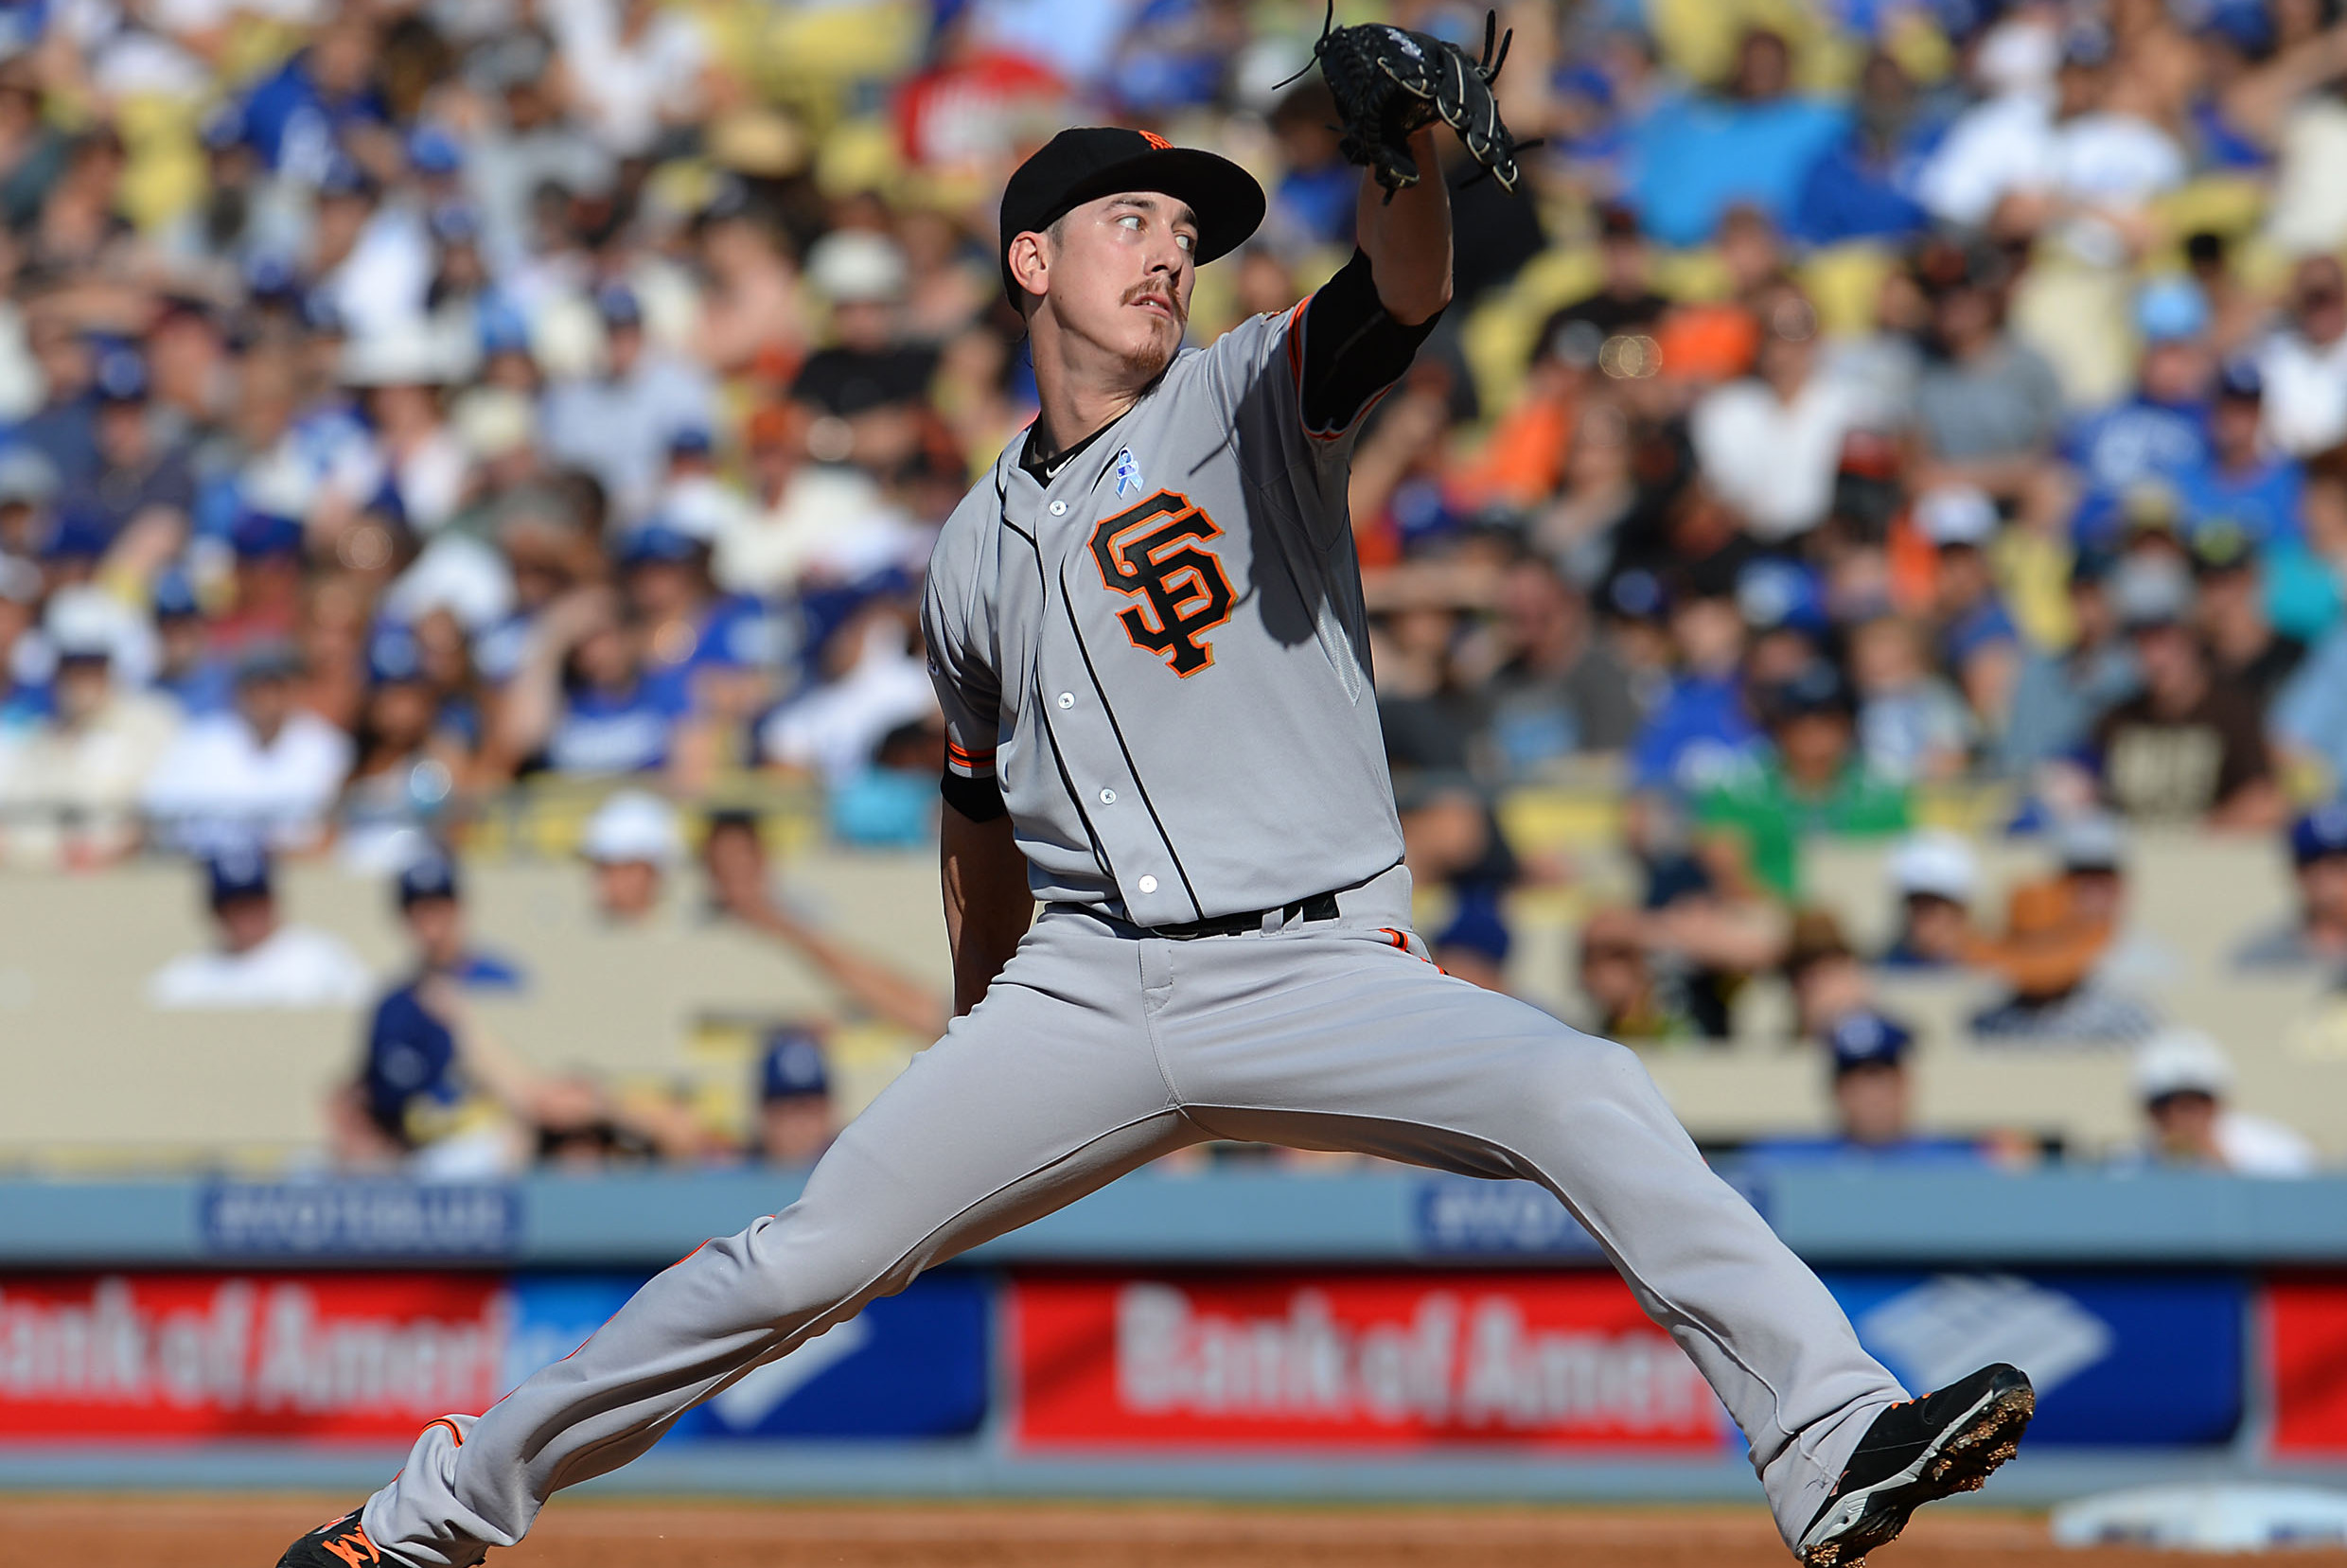 San Francisco Giants pitcher Tim Lincecum day-to-day with tightness in back  - Sports Illustrated